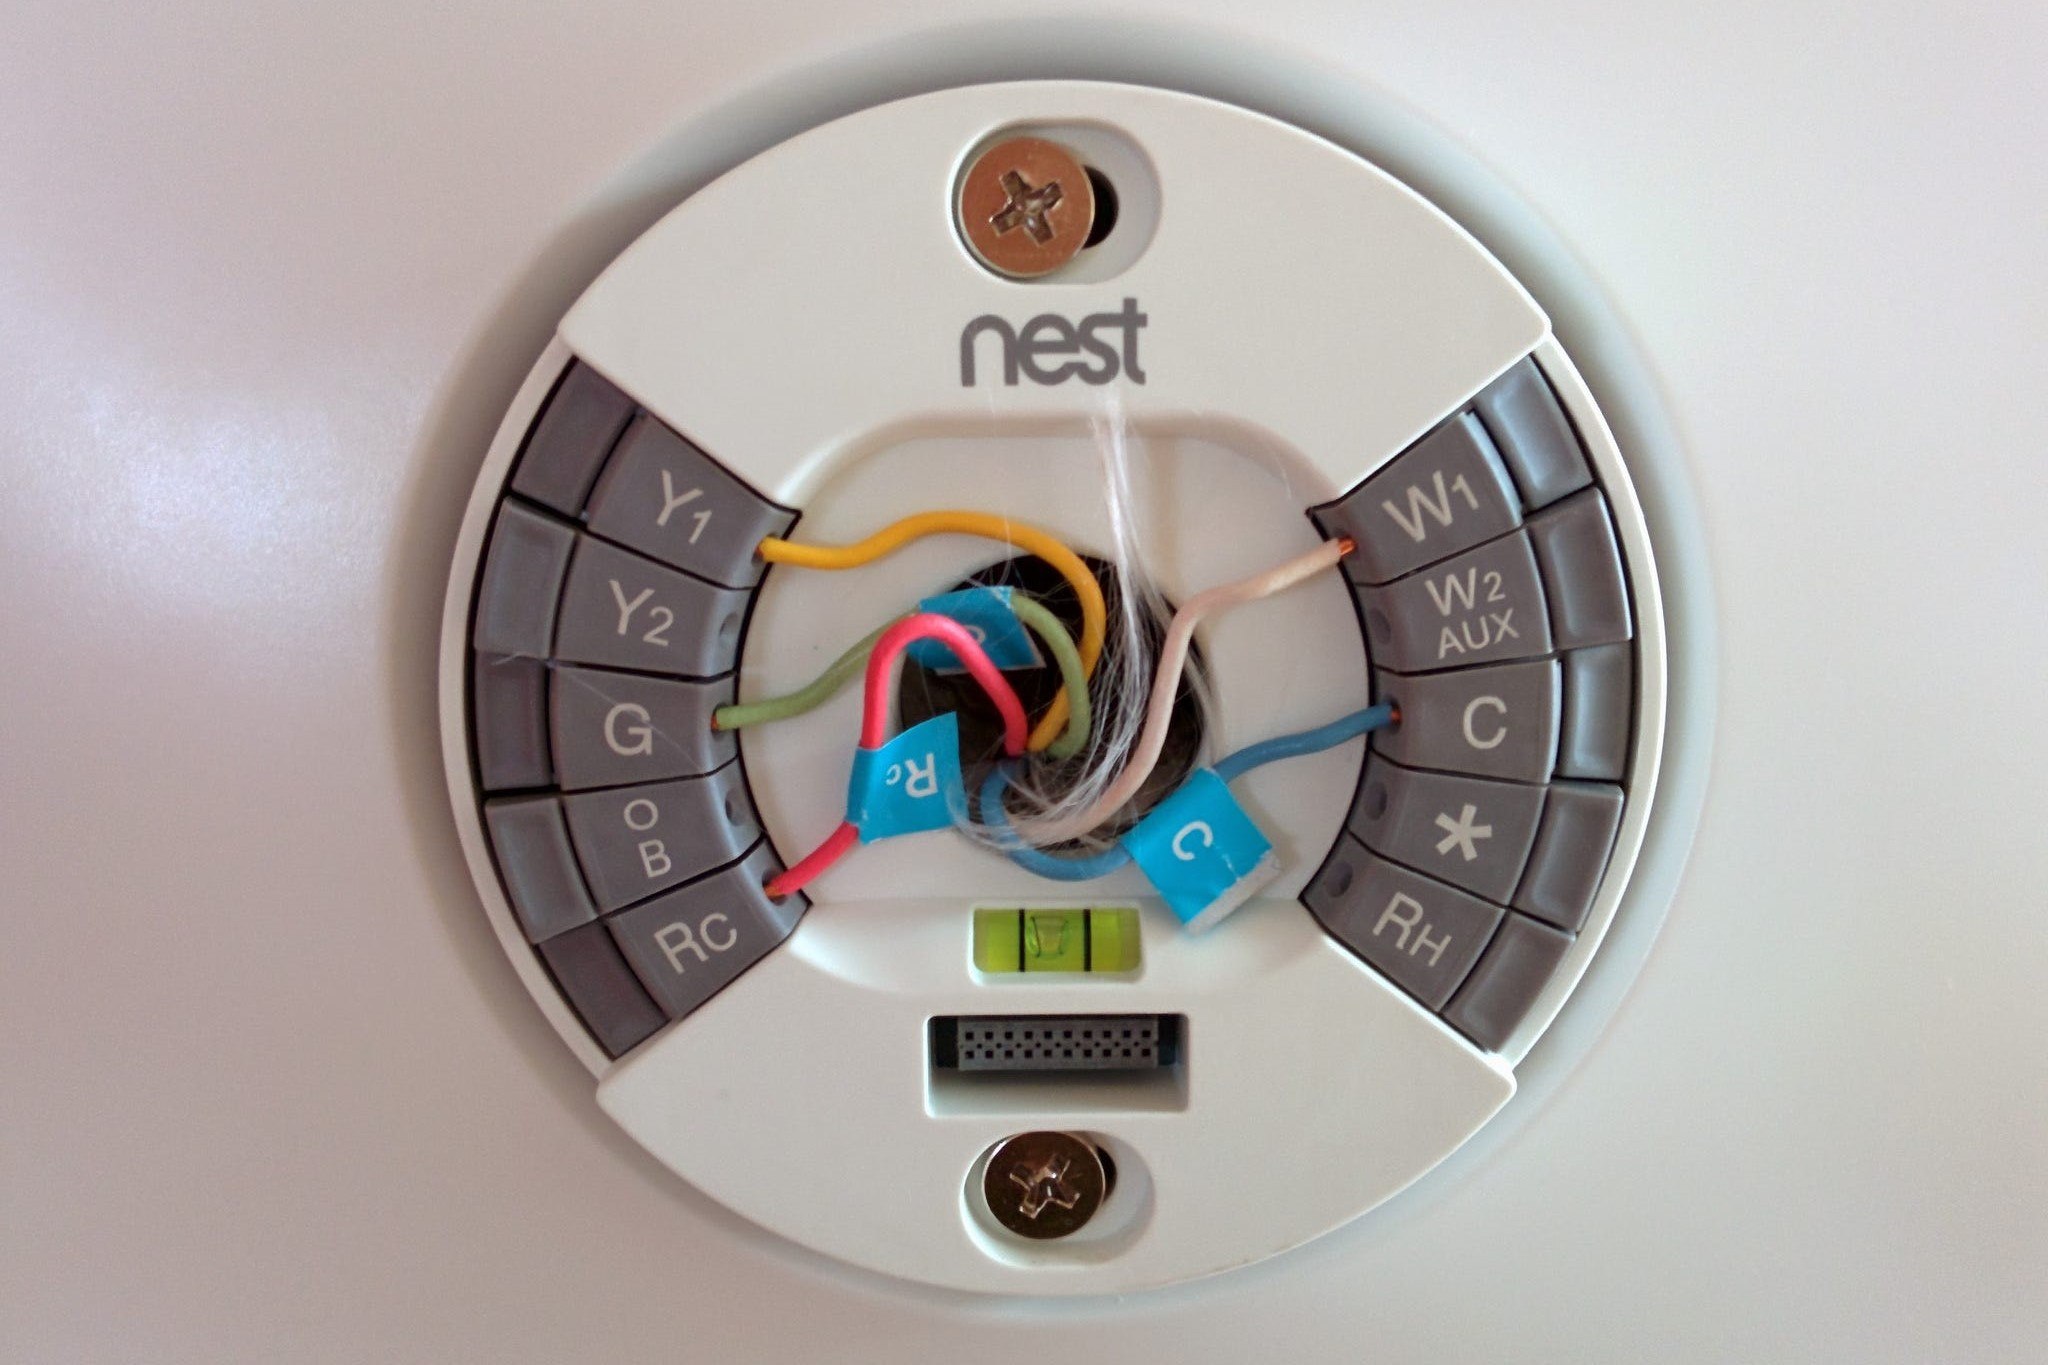 What Is RC And RH On A Nest Thermostat